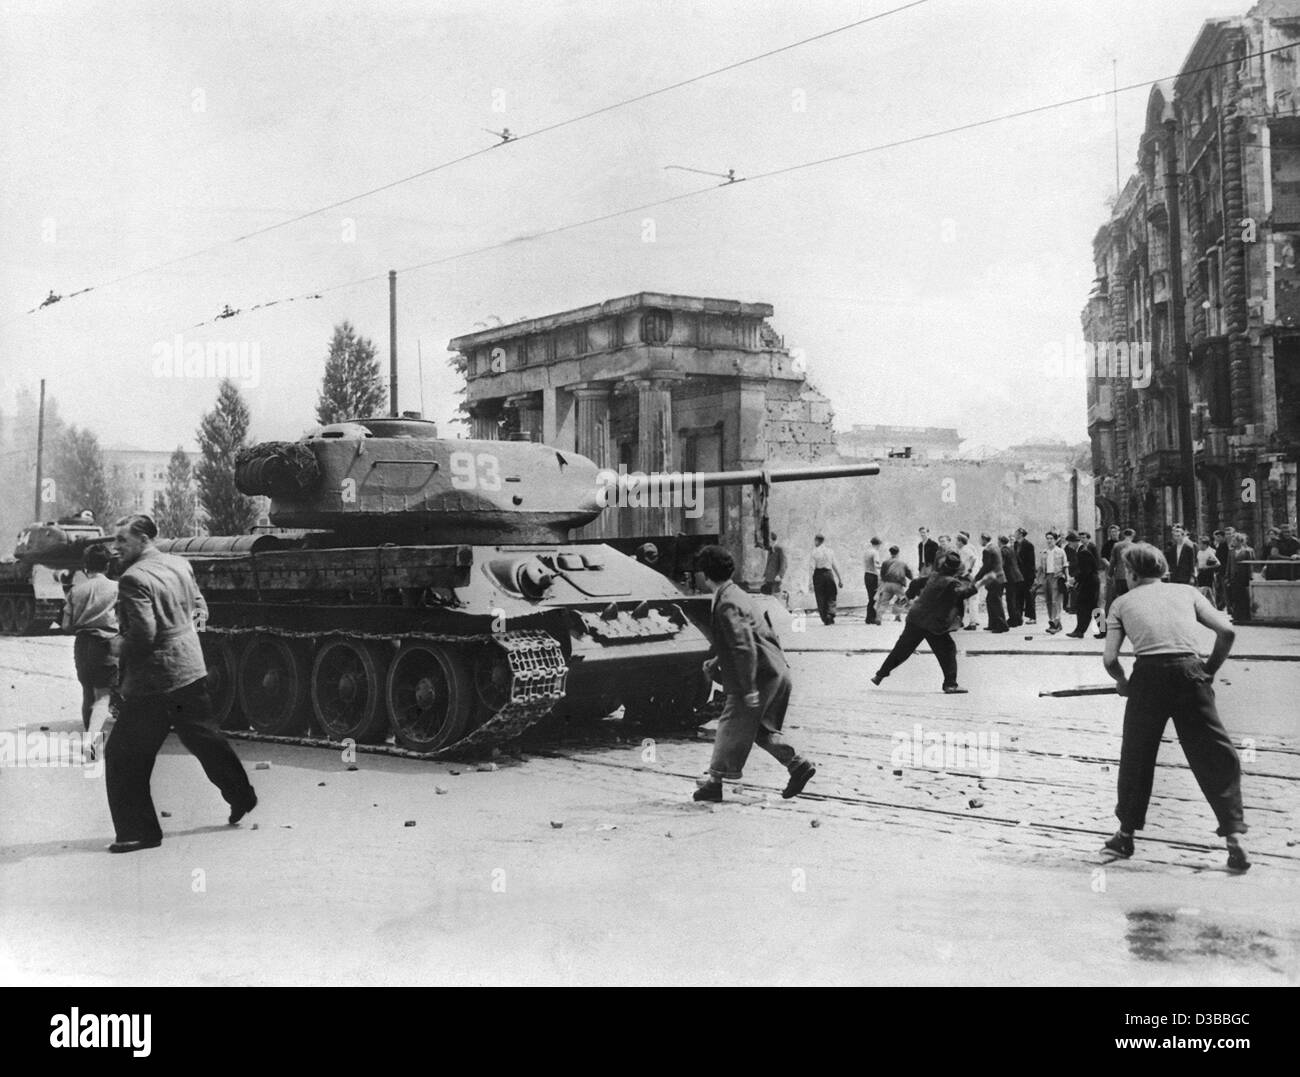 (dpa files) - Demonstrators throw stones at Soviet tanks during the riots against the communist regime in East Berlin, 17 June 1953. The uprising escalated when strikes and a demonstration against unreasonable production quotas were knocked down by Soviet tanks and troops on 17 June. Stock Photo